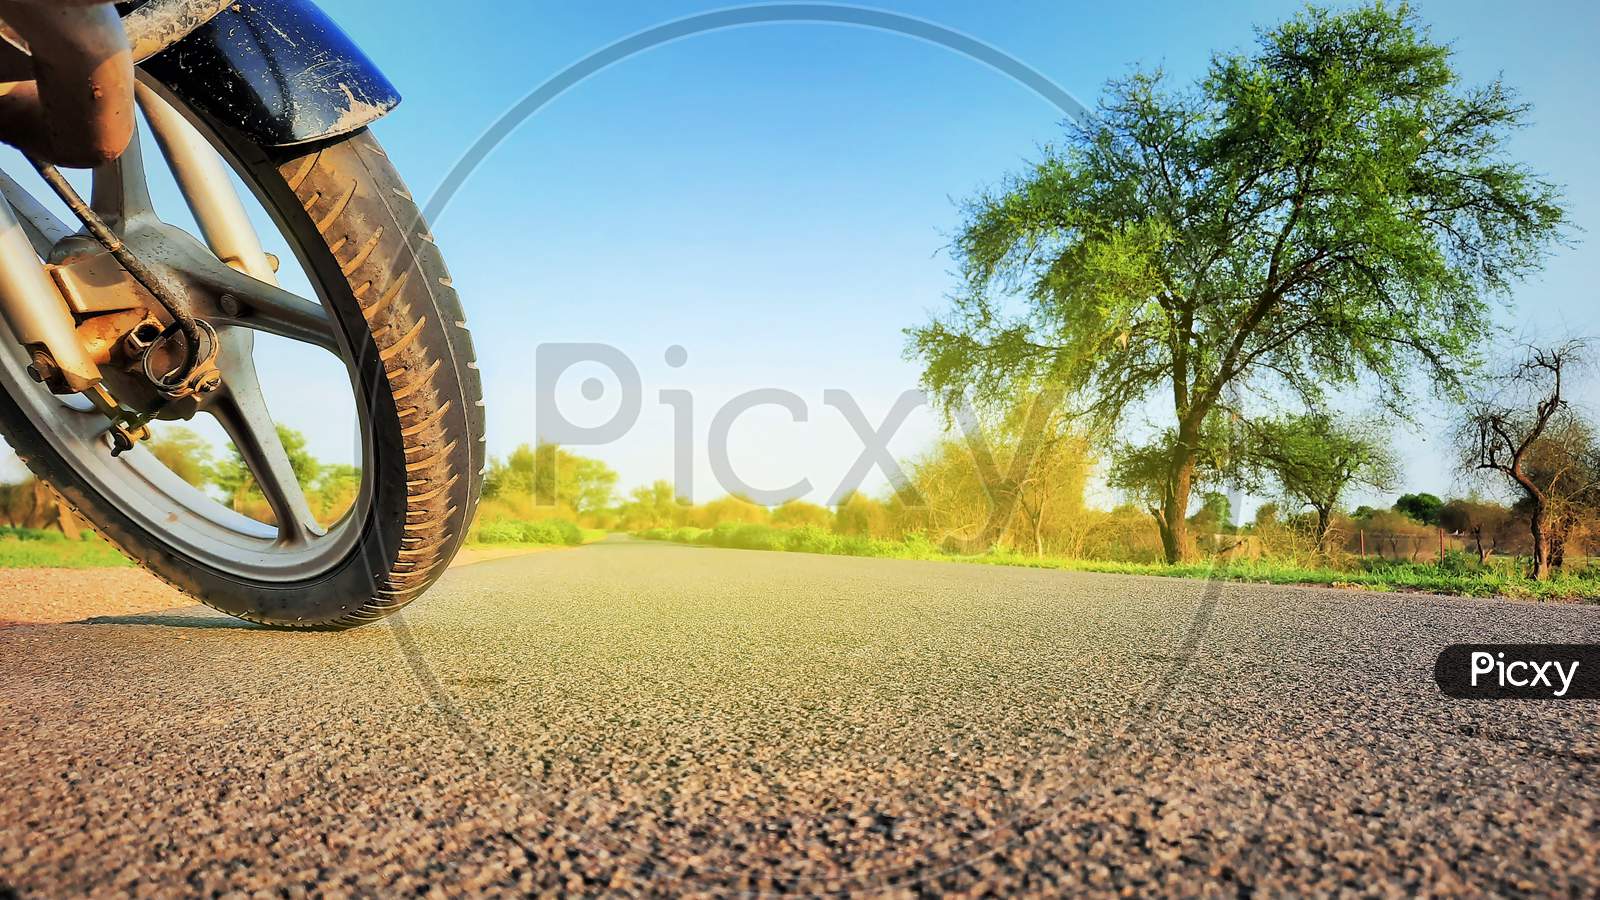 A Motorcycle Standing On Road Front Tyre Closeup